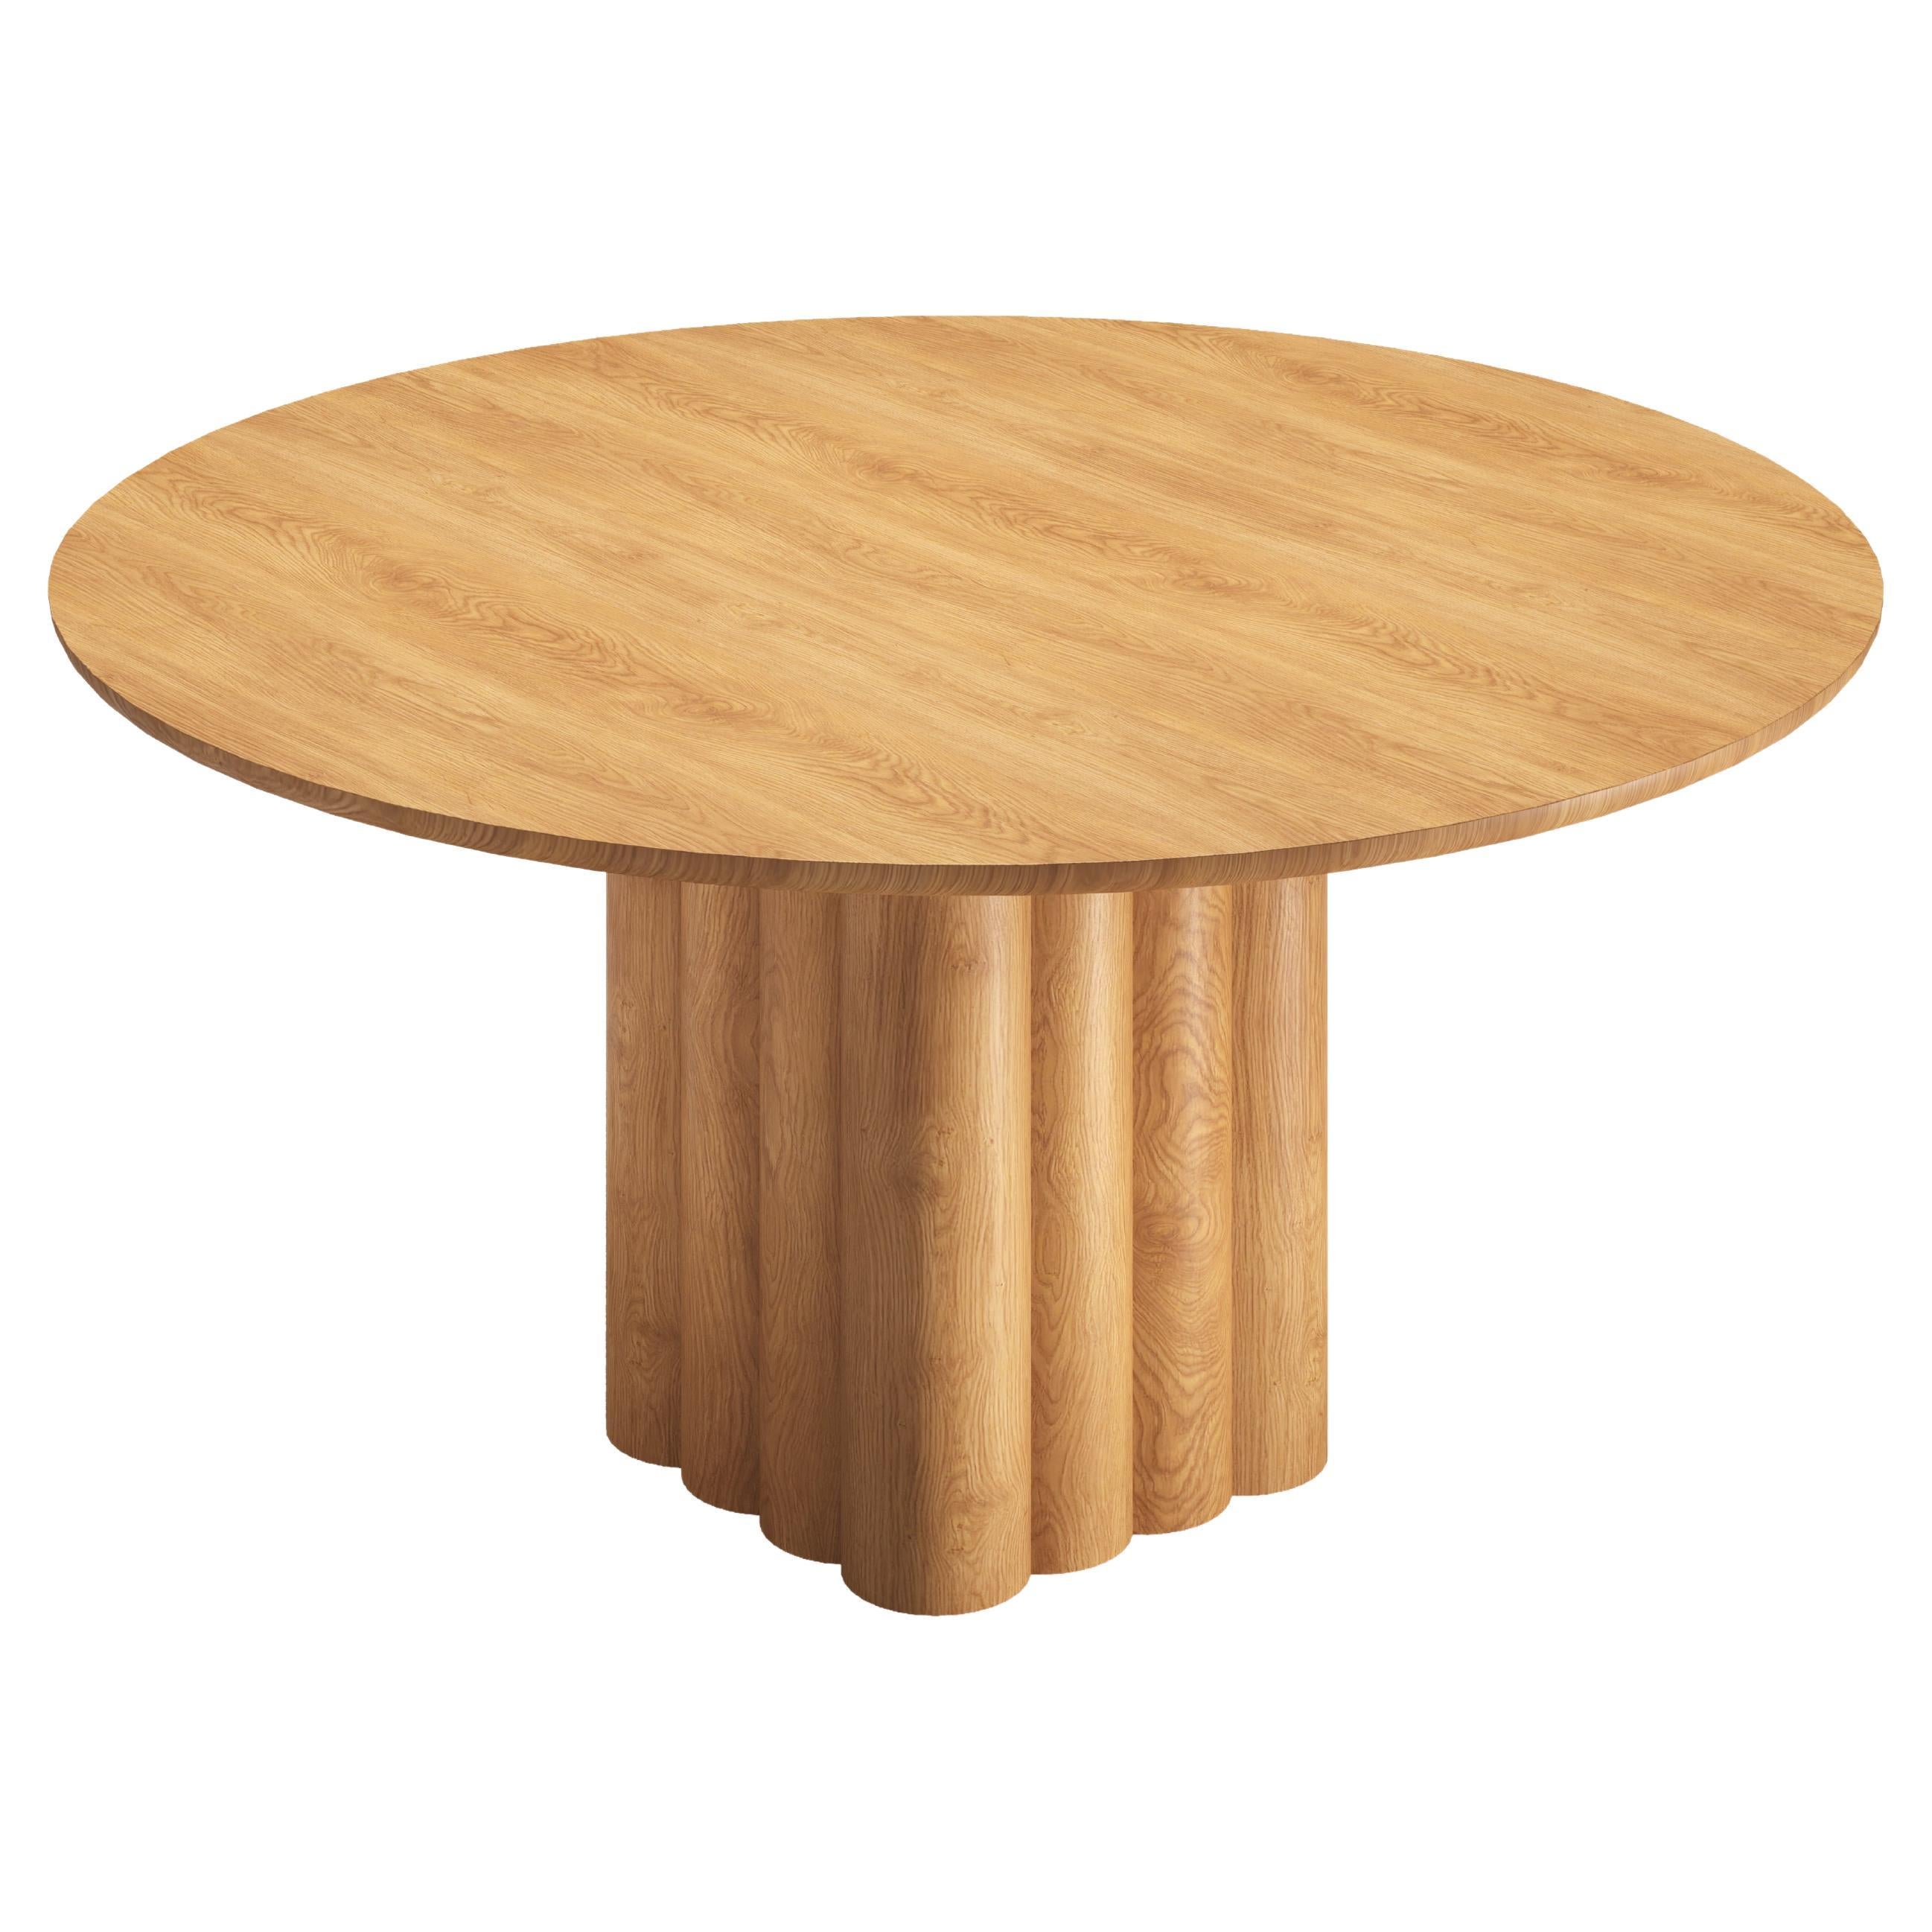 Round Dining Table 'Plush' by Dk3, Natural Oak, 140 cm For Sale